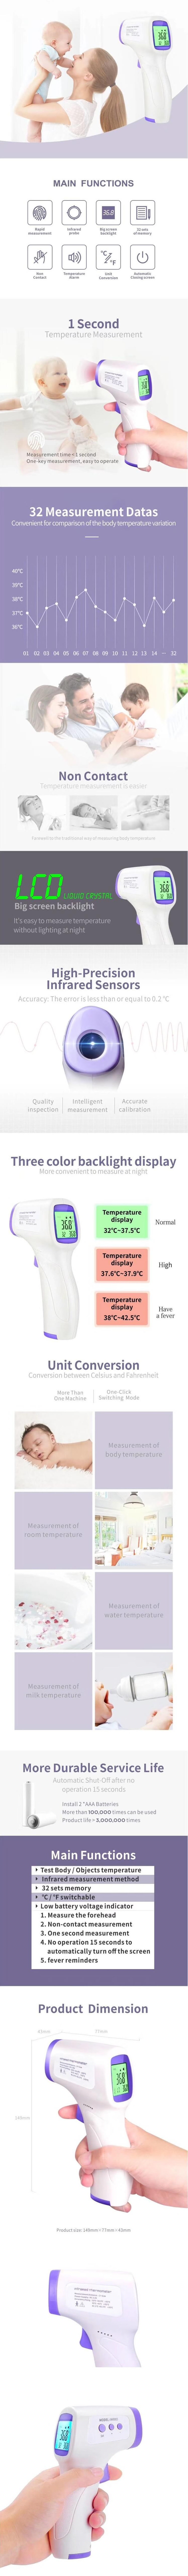  View larger image Non-Contact IR Infrared Thermometer Baby Thermometer Laser LCD Backlight Digital Forehead Body Temperature Meter Non-Contact IR Infrared Thermometer Baby Thermometer Laser LCD Backlight Digital Forehead Body Temperature Meter Non-Contact IR Infrared Thermometer Baby Thermometer Laser LCD Backlight Digital Forehead Body Temperature Meter Non-Contact IR Infrared Thermometer Baby Thermometer Laser LCD Backlight Digital Forehead Body Temperature Meter Non-Contact IR Infrared Thermometer Baby Thermometer Laser LCD Backlight Digital Forehead Body Temperature Meter Non-Contact IR Infrared Thermometer Baby Thermometer Laser LCD Backlight Digital Forehead Body Temperature Meter Add to CompareShare